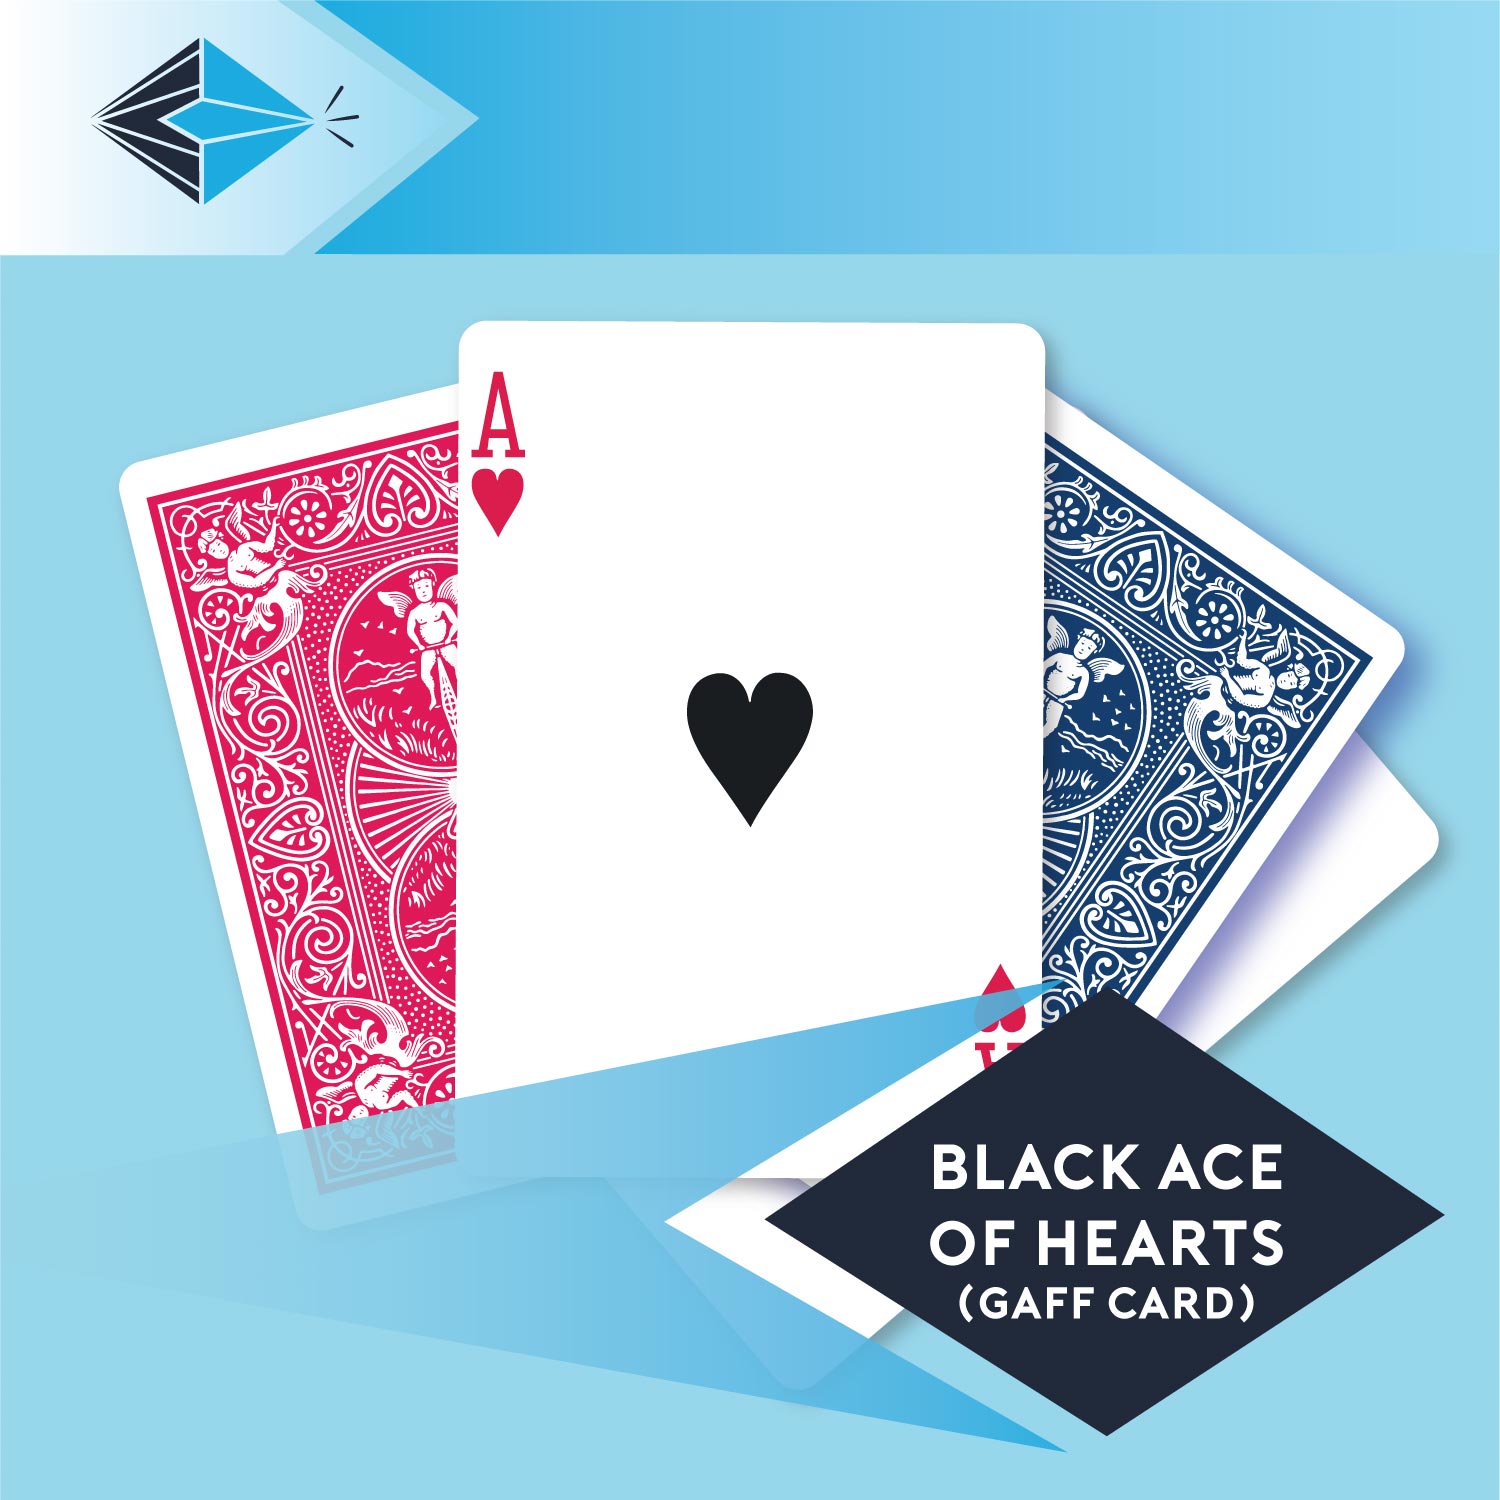 black ace of hearts gaff card 8 printbymagic magicians gaff cards printers Stockport Manchester UK